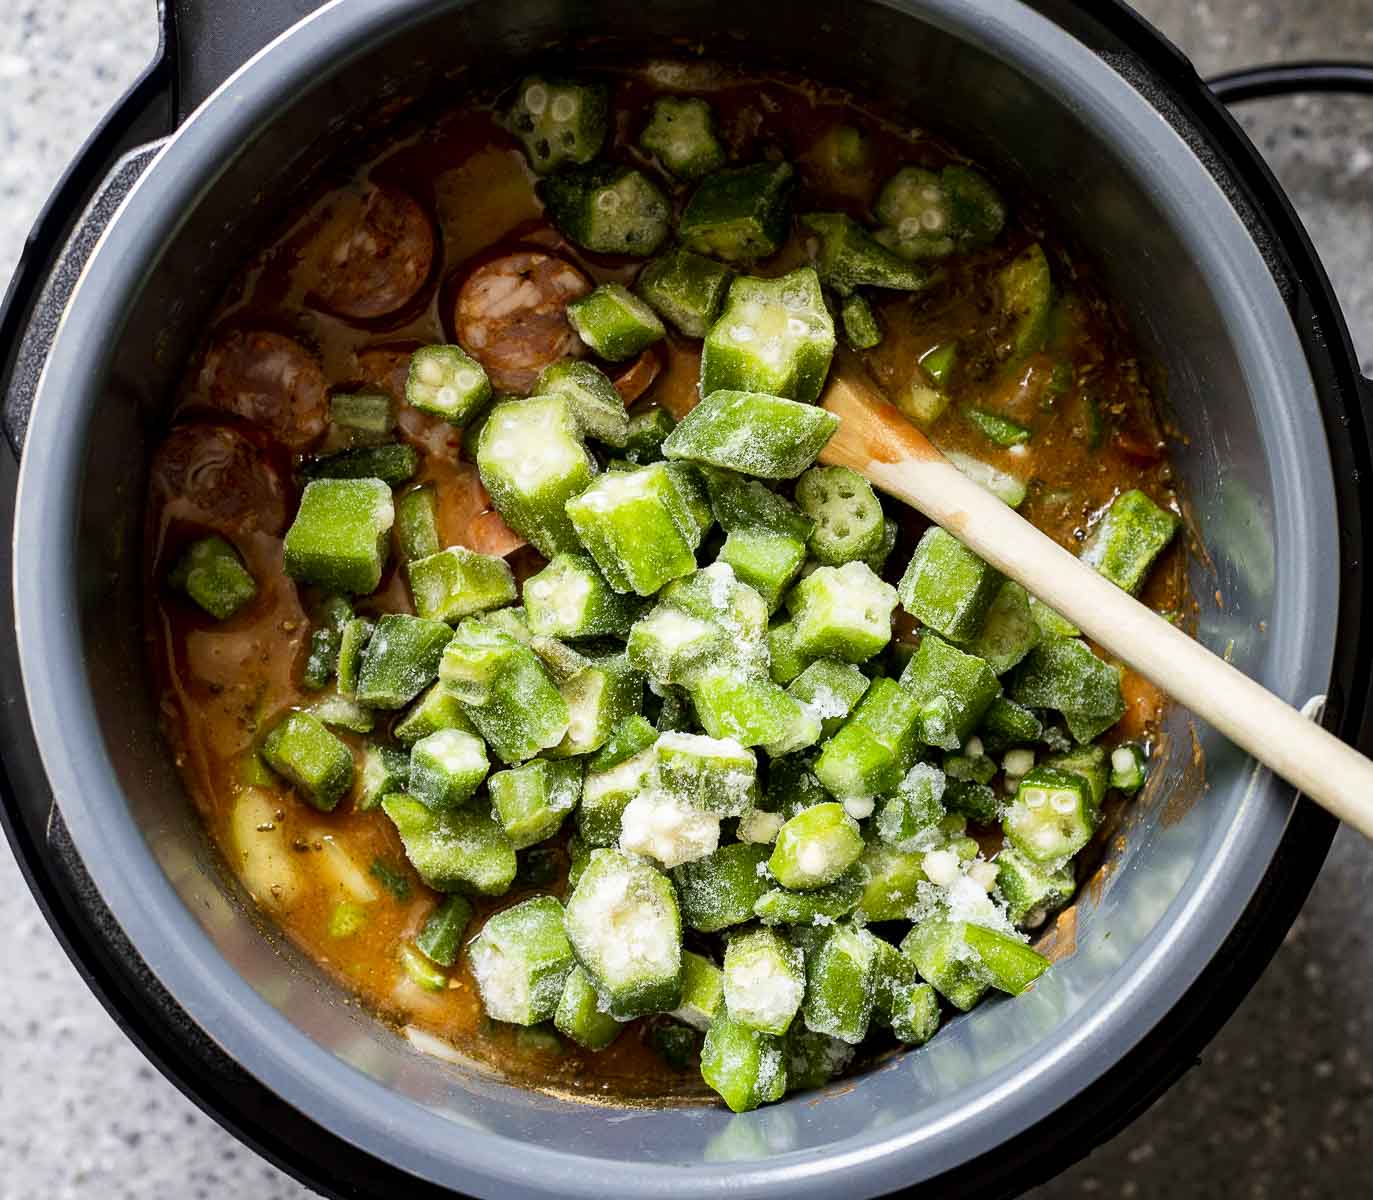 Green pepper, onion and celery added to the gumbo in the Instant Pot insert.